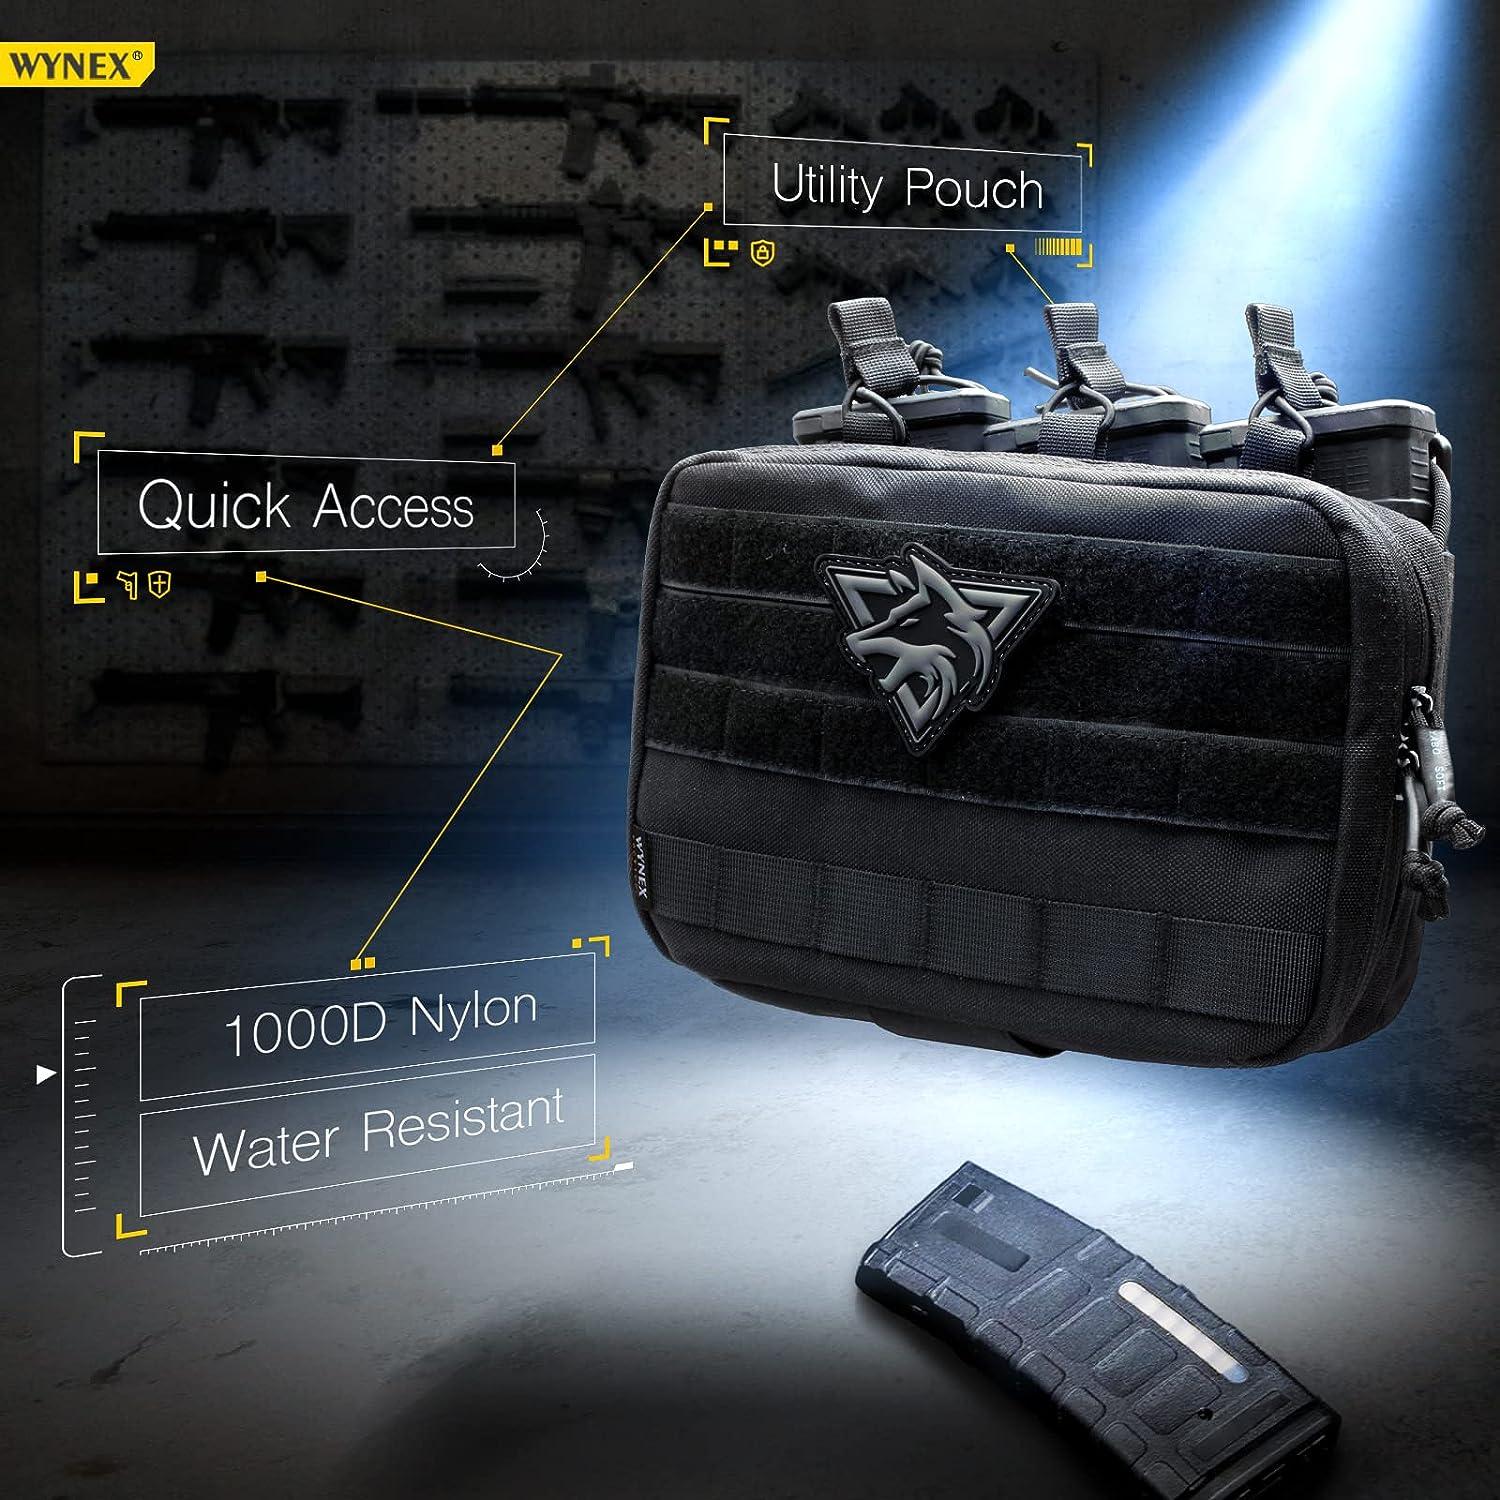 WYNEX Tactical Admin Molle Pouch, Medical EDC EMT Utility Bag Shell Design  Attachment Pouches Hiking Belt Bags in Bahrain